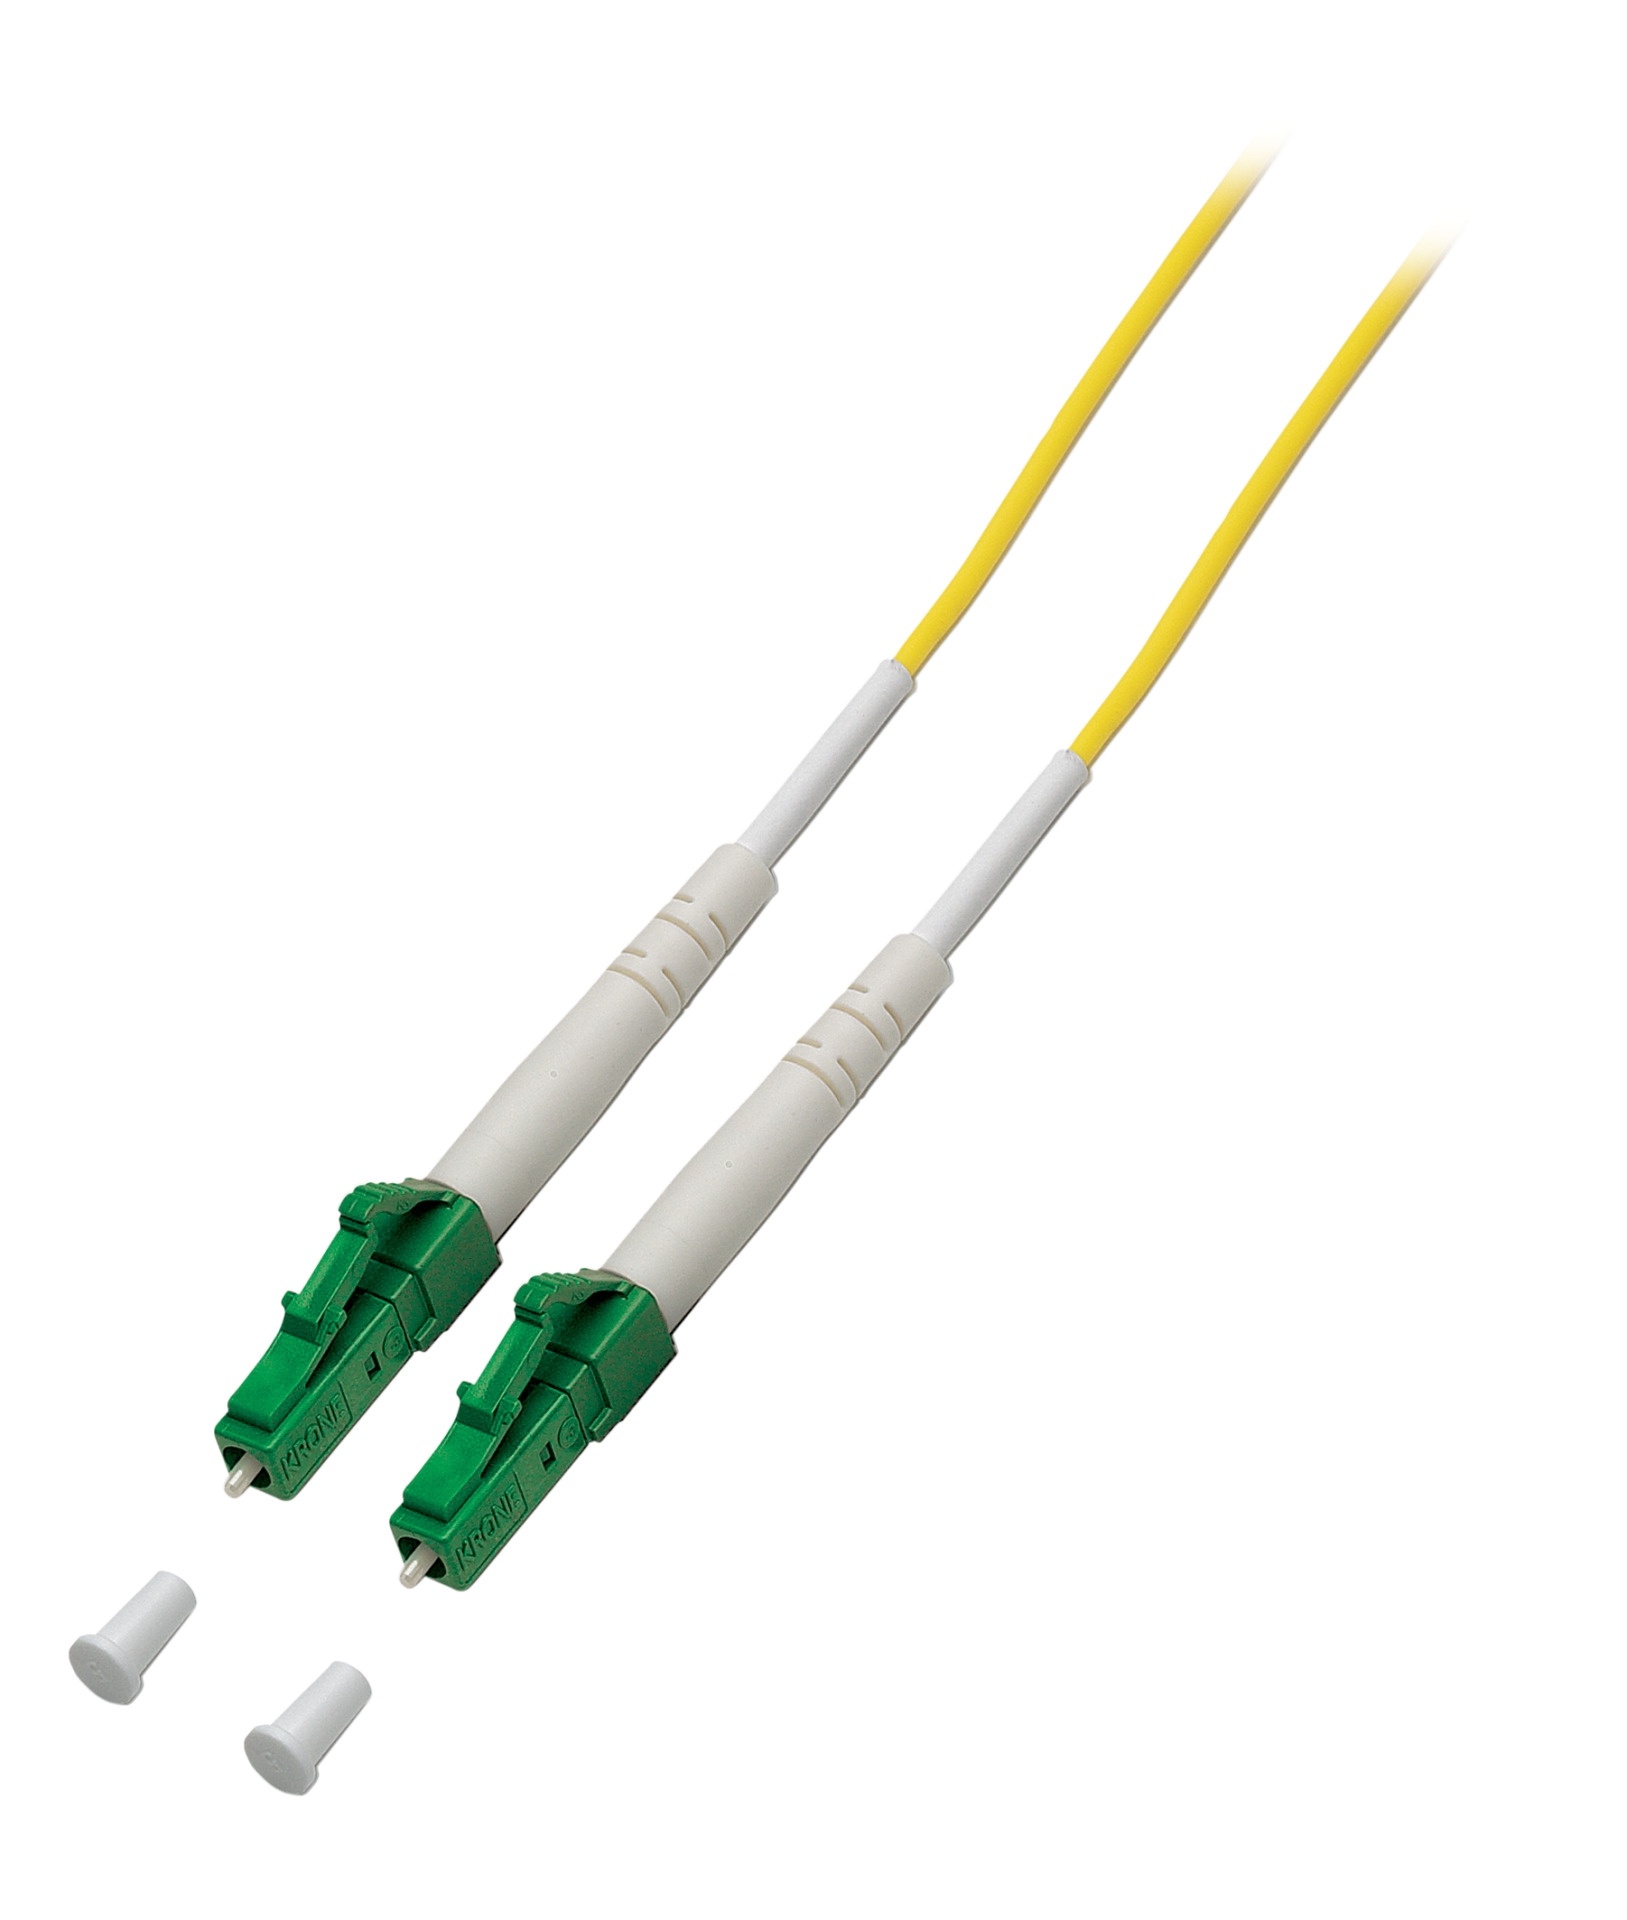 Simplex FO Patch Cable LC/APC-LC/APC G657.A2 12m 3,0mm yellow 9/125µm